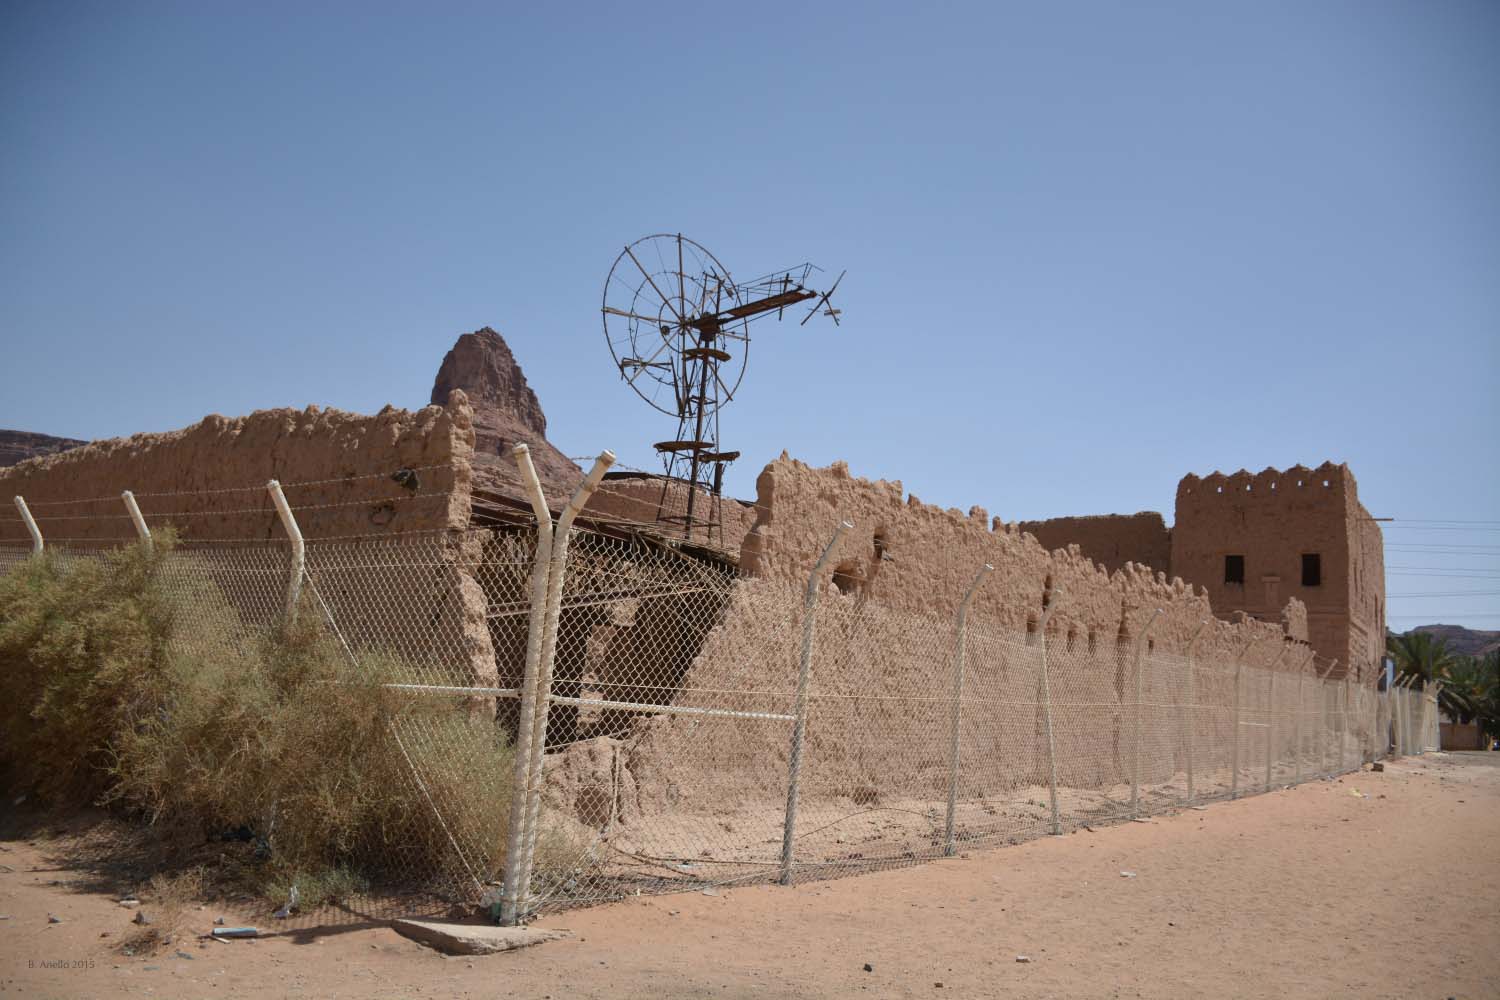 View from the corner of the al-Ula Station and the fence around it